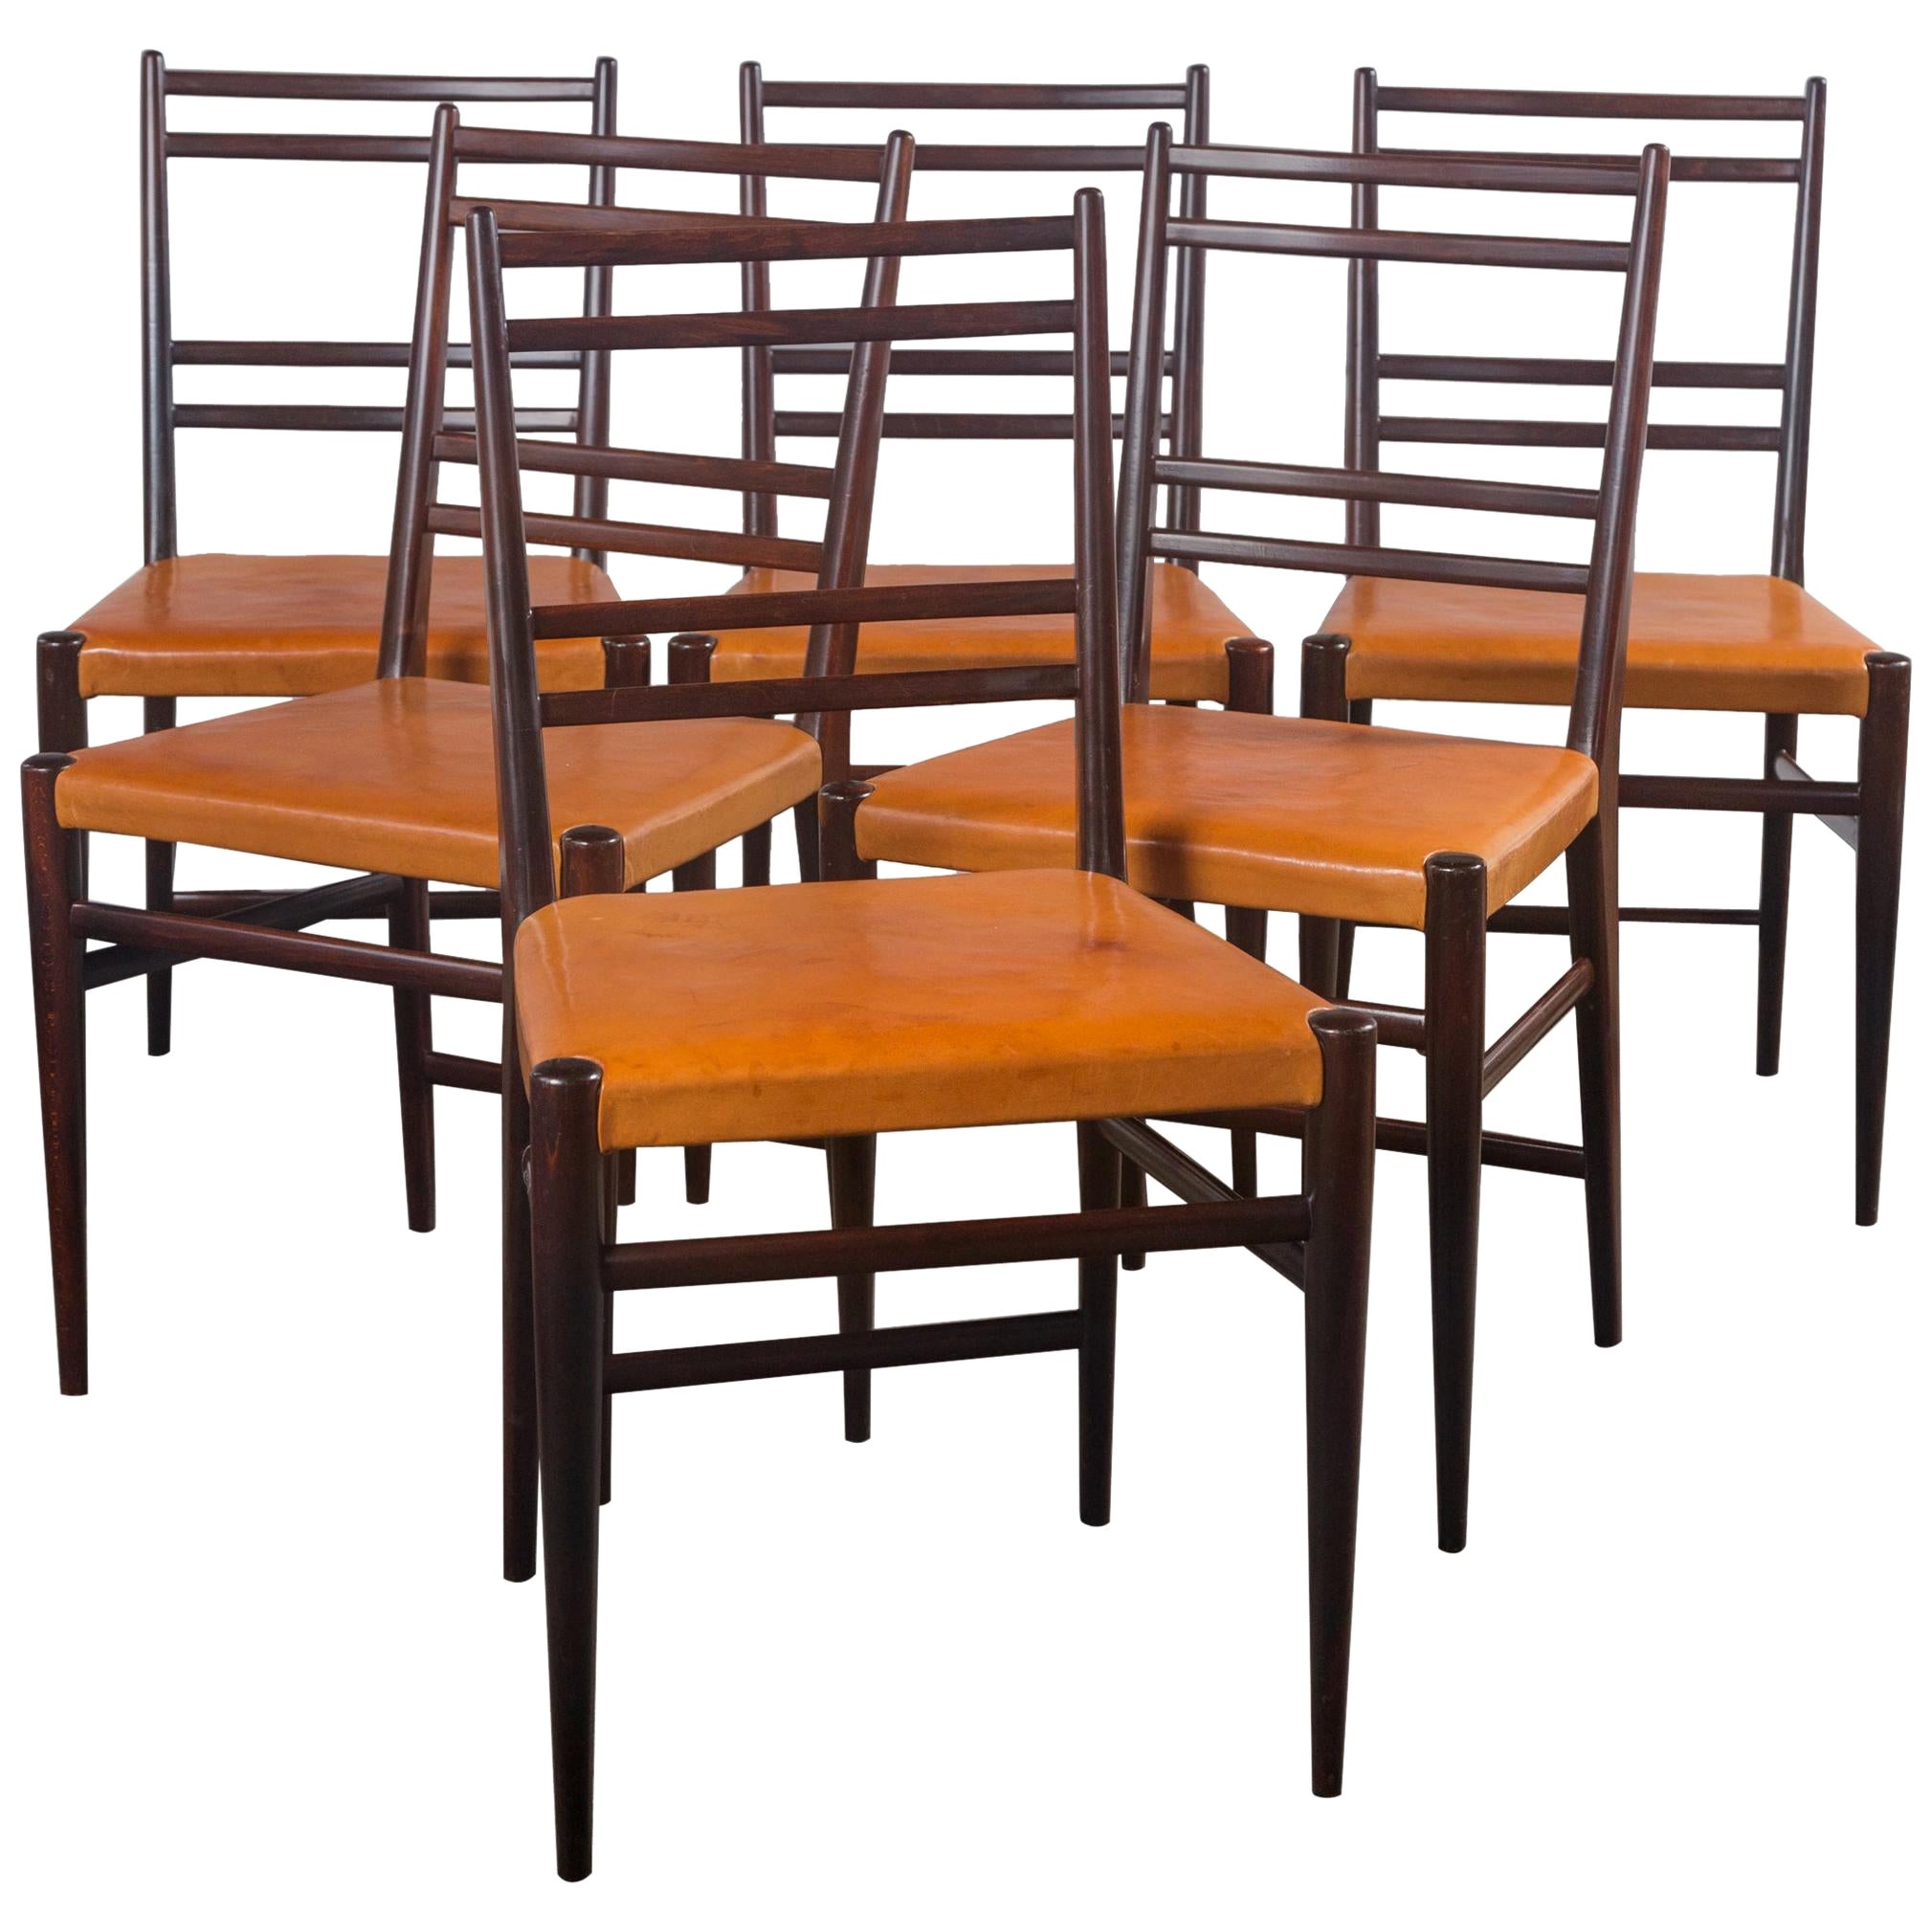 Swedish Mid-Century Brown Leather and Wood Dining Chairs, Set of 6 For Sale